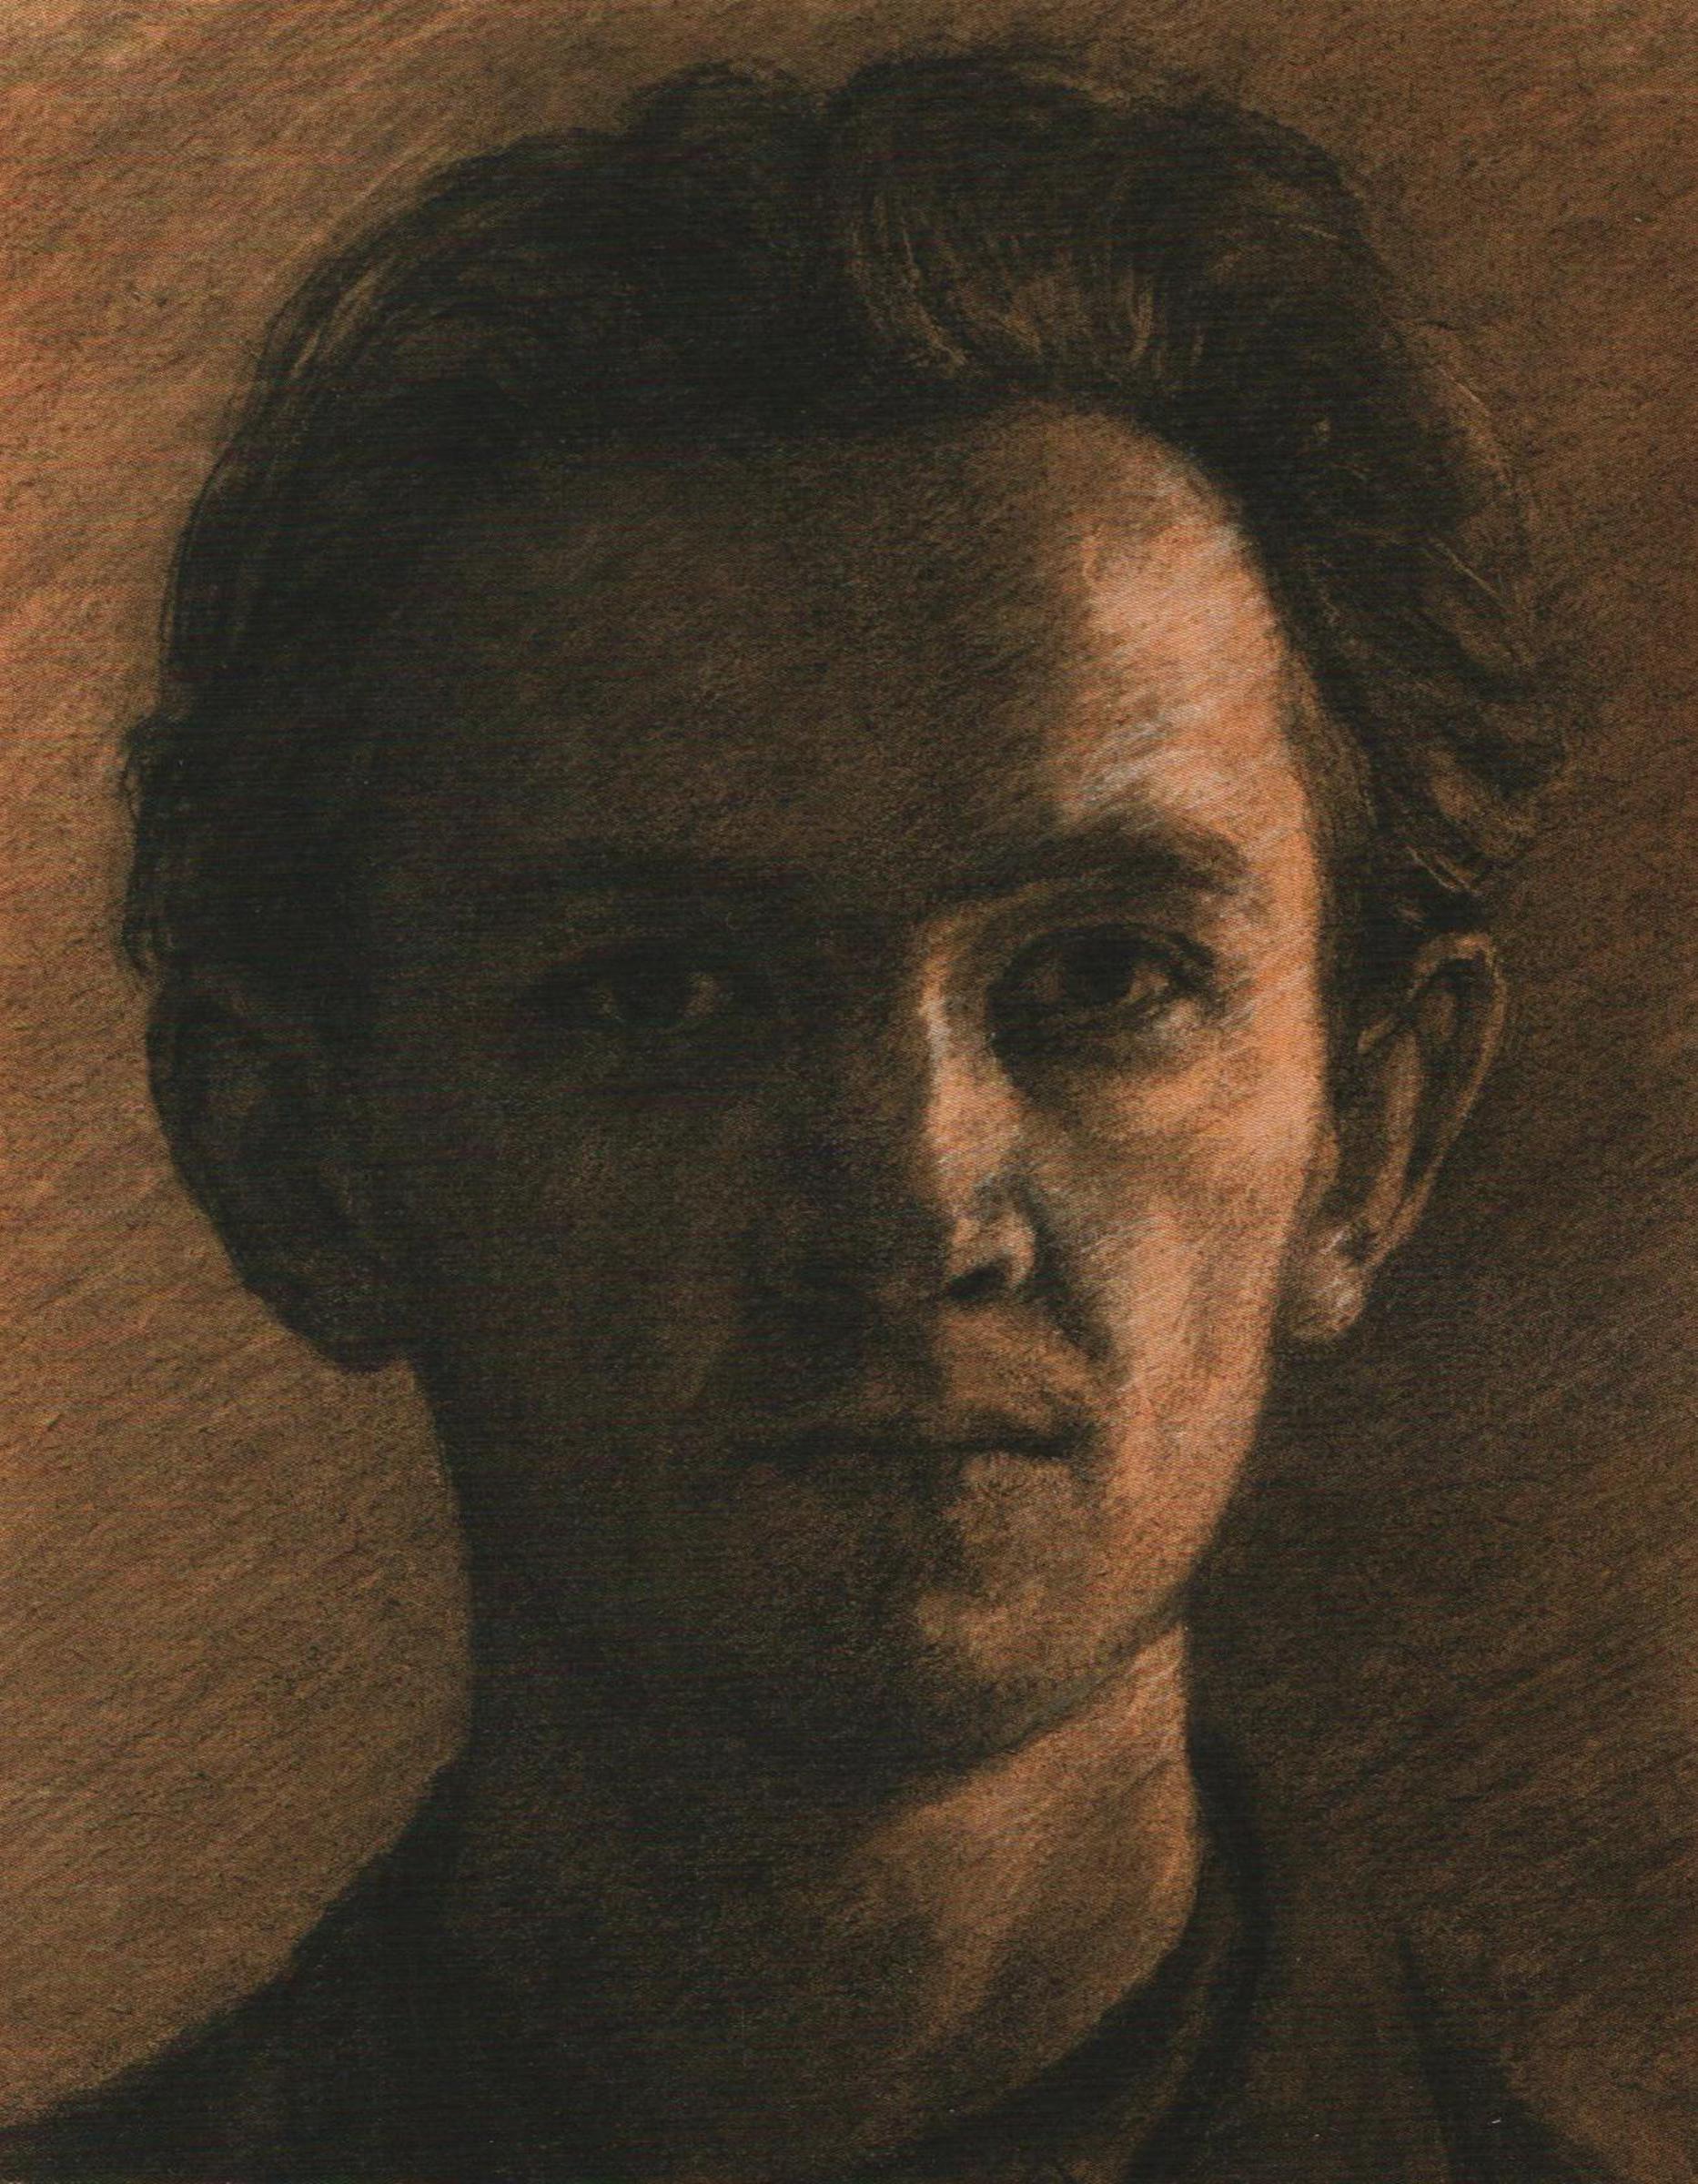 Self-portrait, 1954, 32 x 25 cm, charcoal drawing, study for an oil painting of his hand; created in his poorly lit student apartment in Karolína Světlá Street